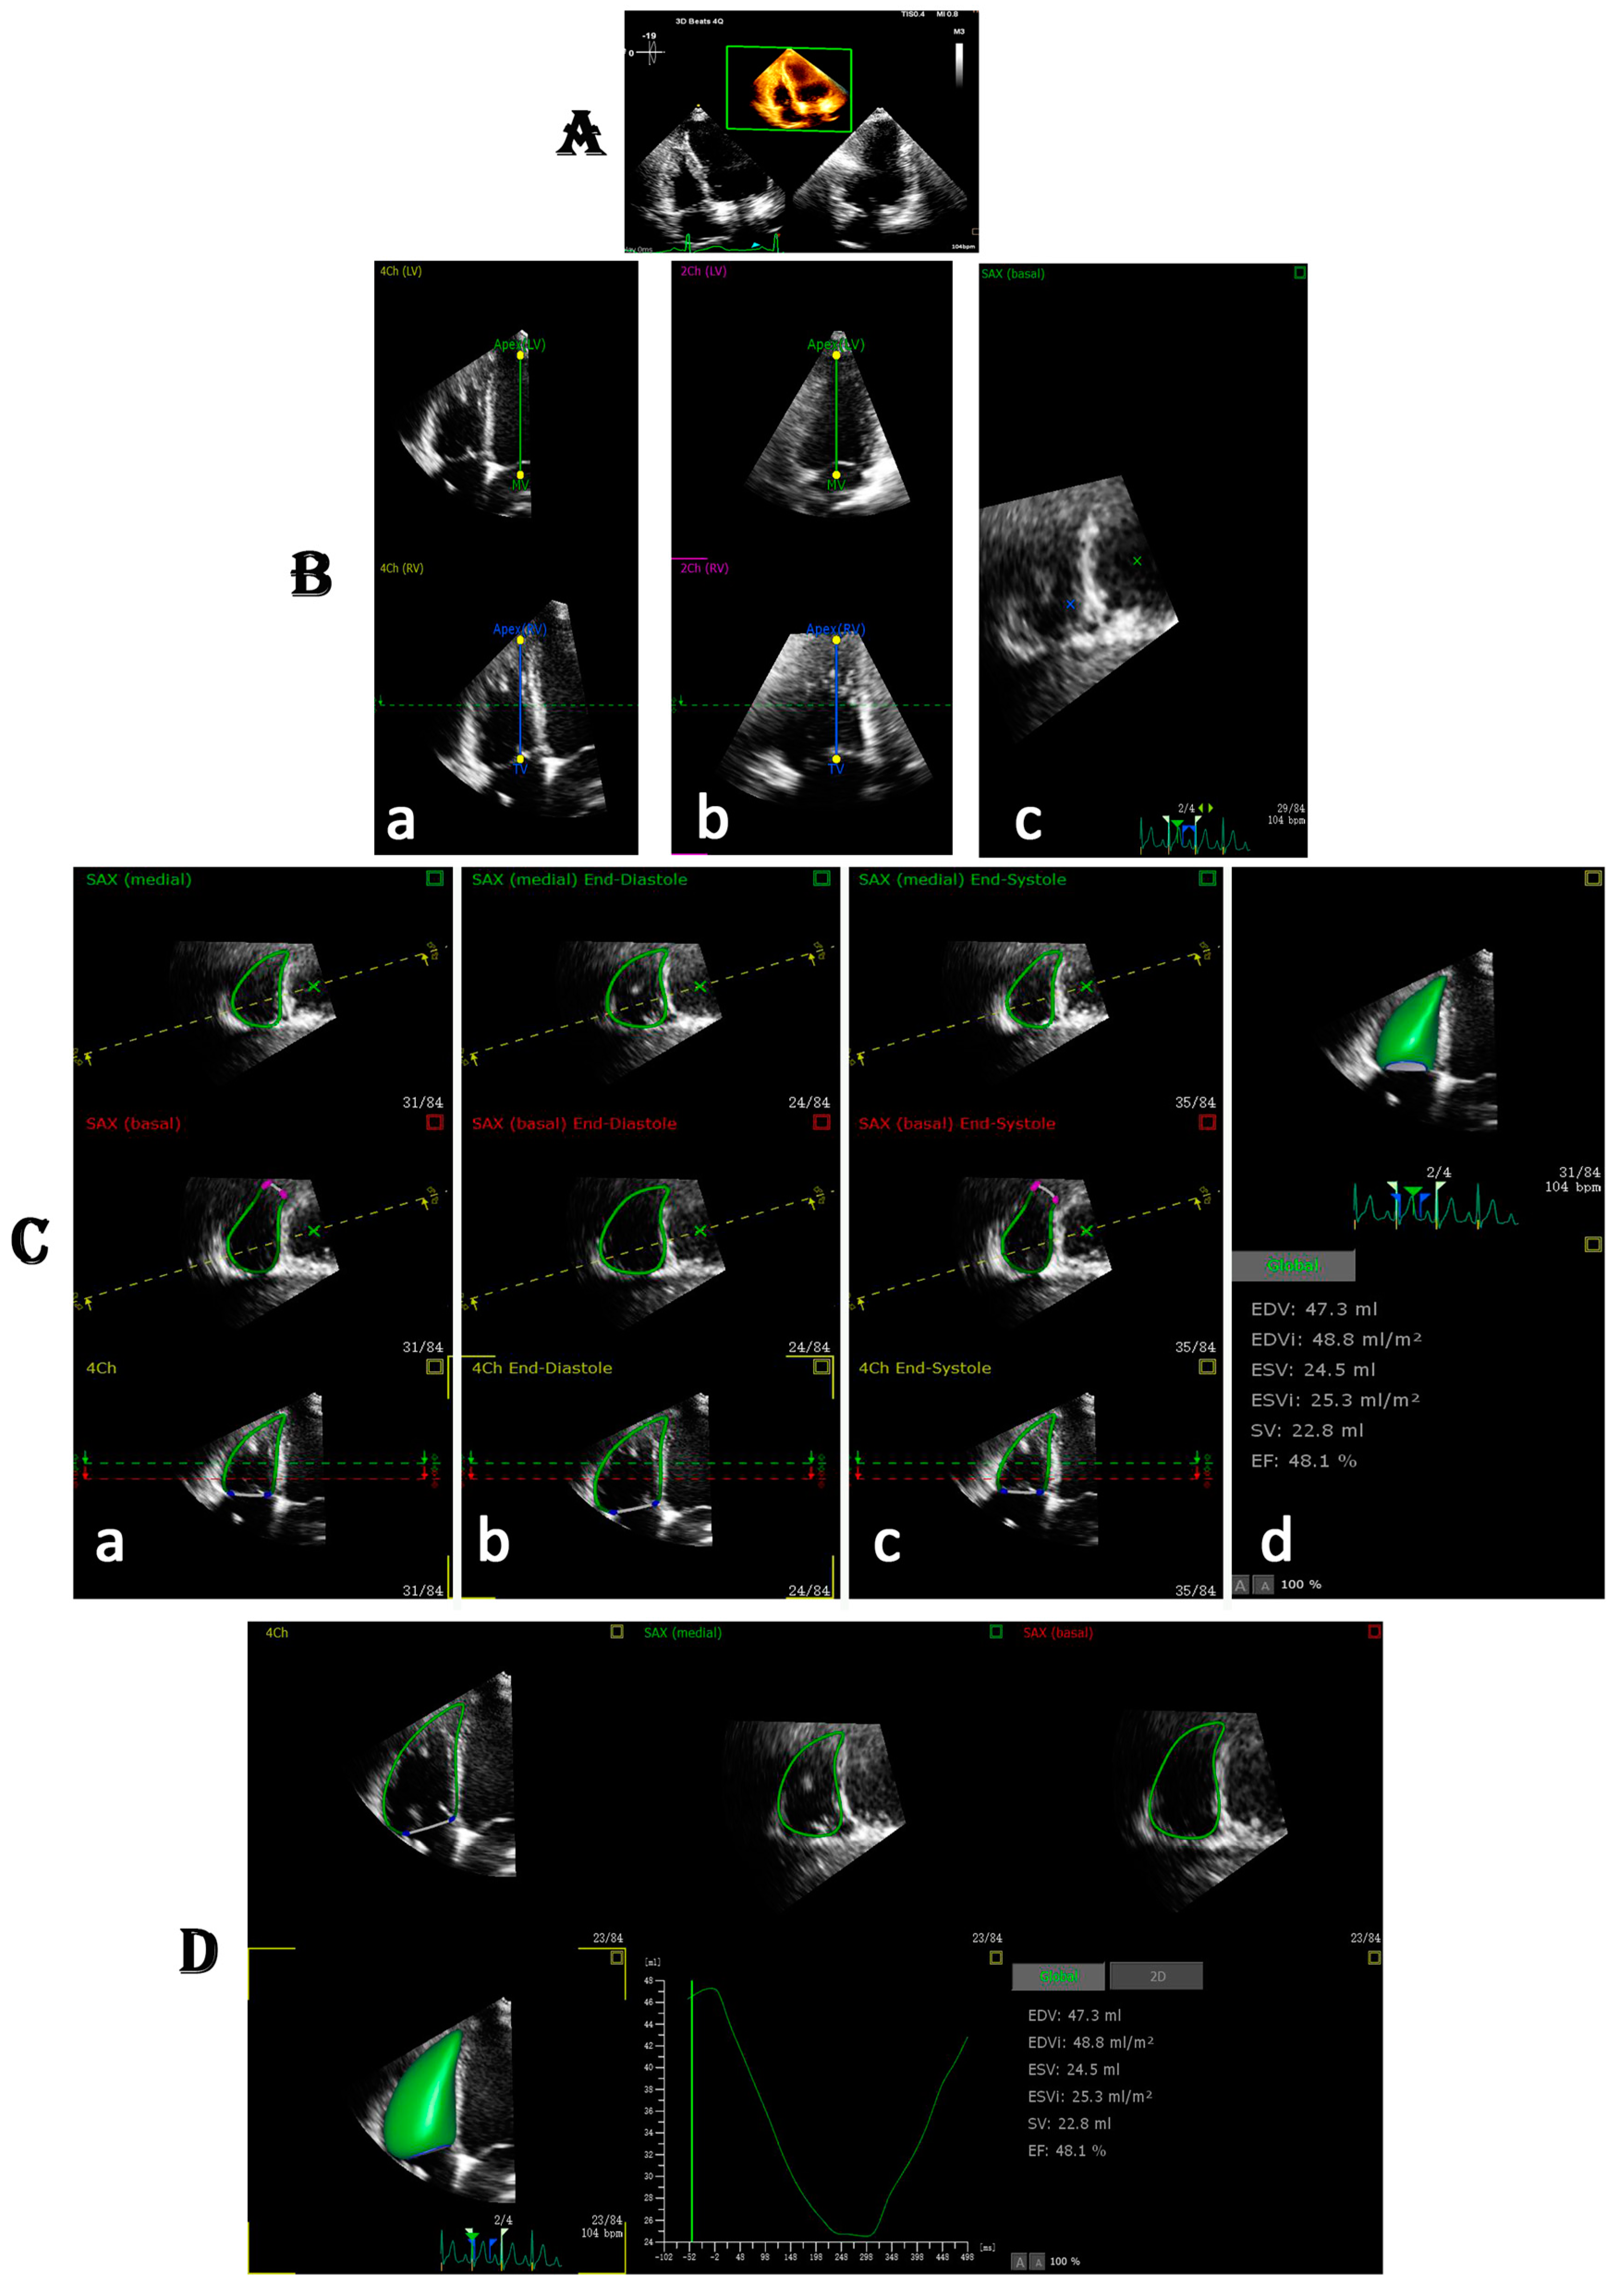 Frontiers  Evaluation of Right Ventricular Myocardial Mechanics by 2- and  3-Dimensional Speckle-Tracking Echocardiography in Patients With an  Ischemic or Non-ischemic Etiology of End-Stage Heart Failure